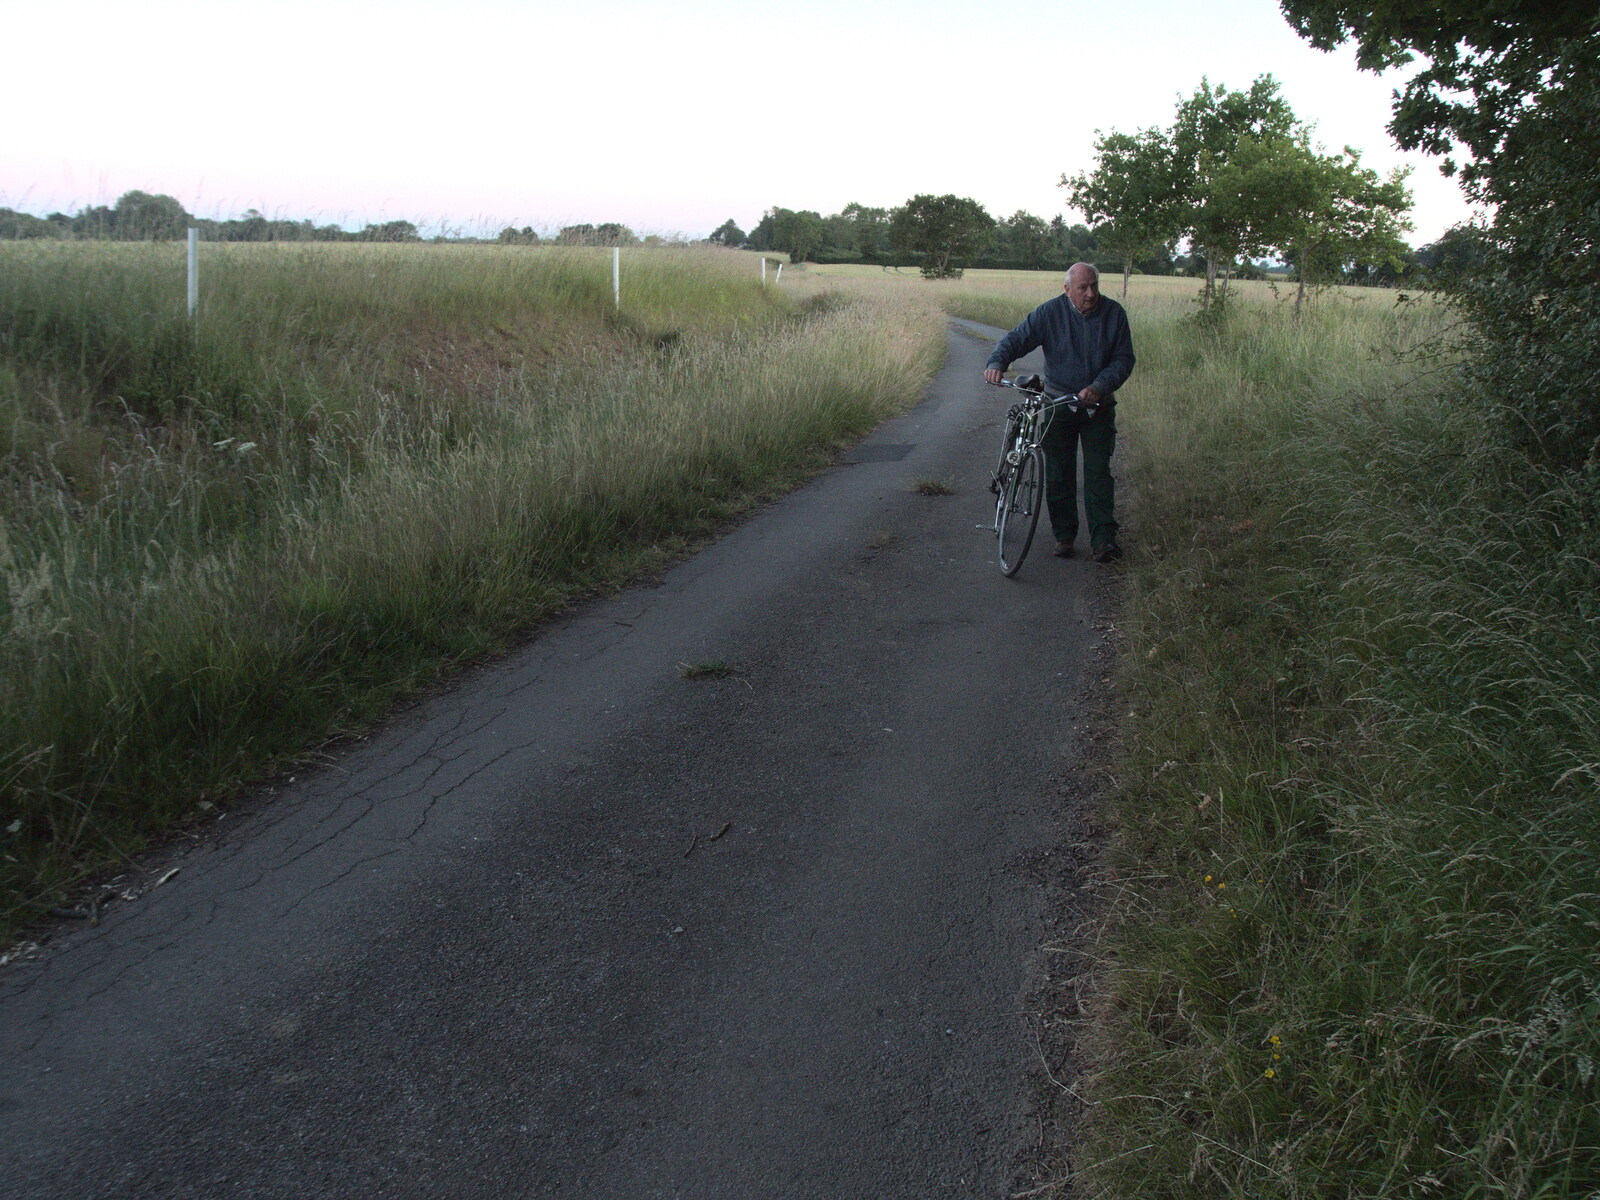 Mick on the back roads of Braiseworth from Pizza at the Village Hall, Brome, Suffolk - 24th June 2022